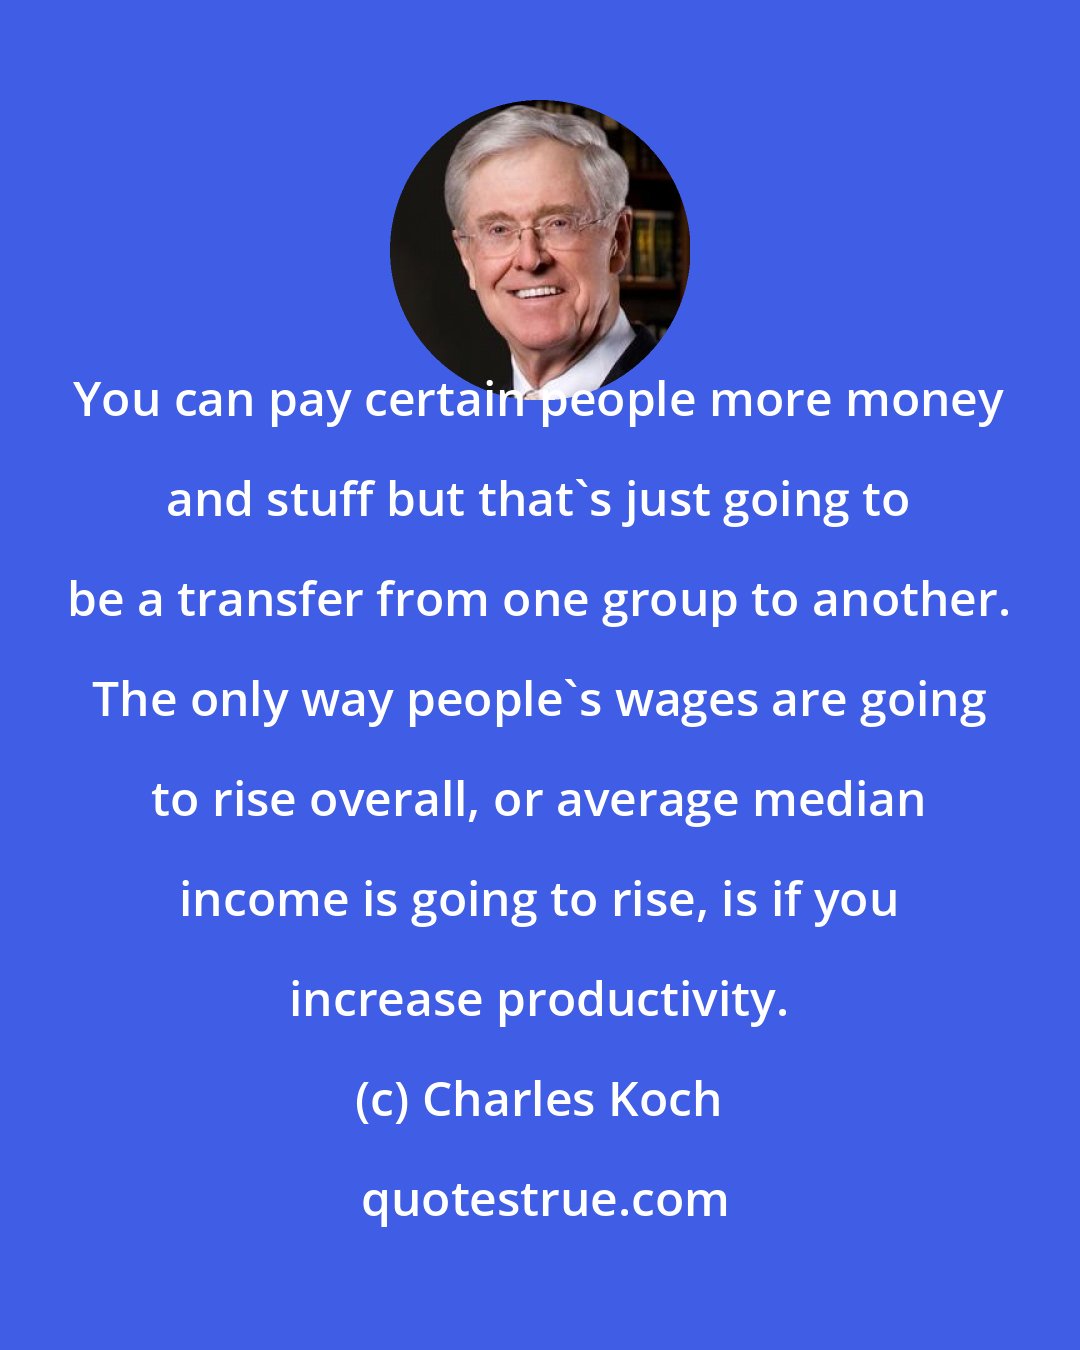 Charles Koch: You can pay certain people more money and stuff but that's just going to be a transfer from one group to another. The only way people's wages are going to rise overall, or average median income is going to rise, is if you increase productivity.